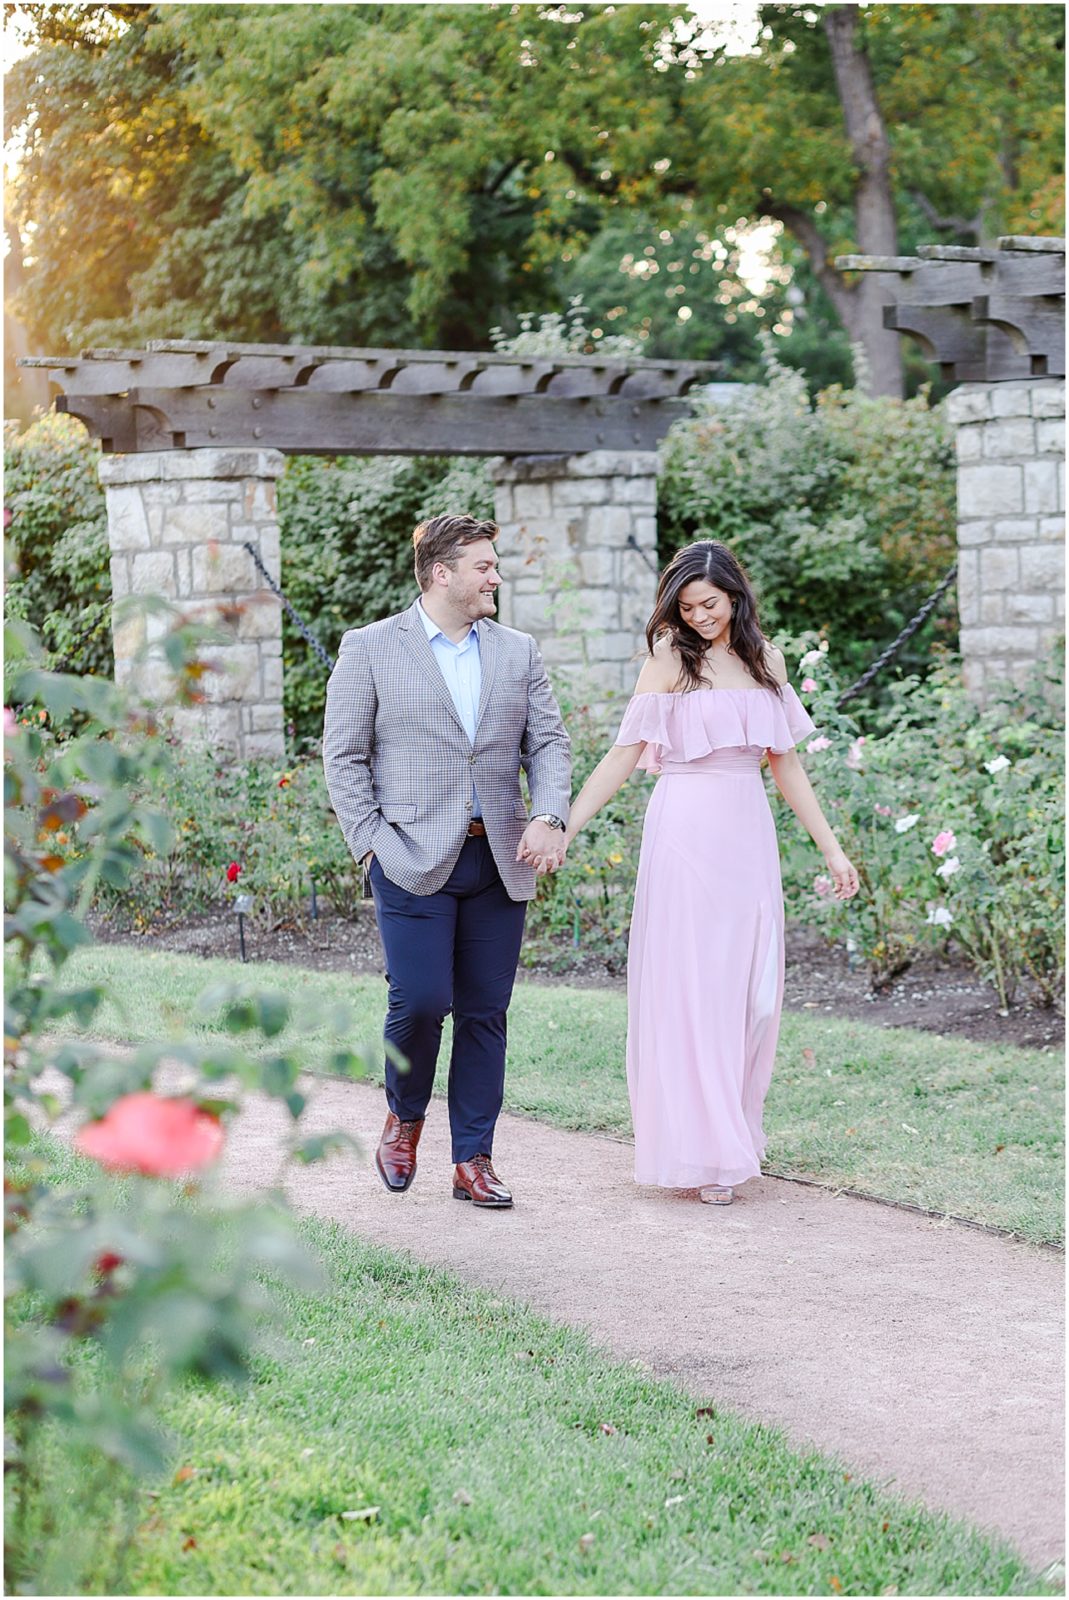 taking a walk for engagement photos at loose park - mariam saifan photography 